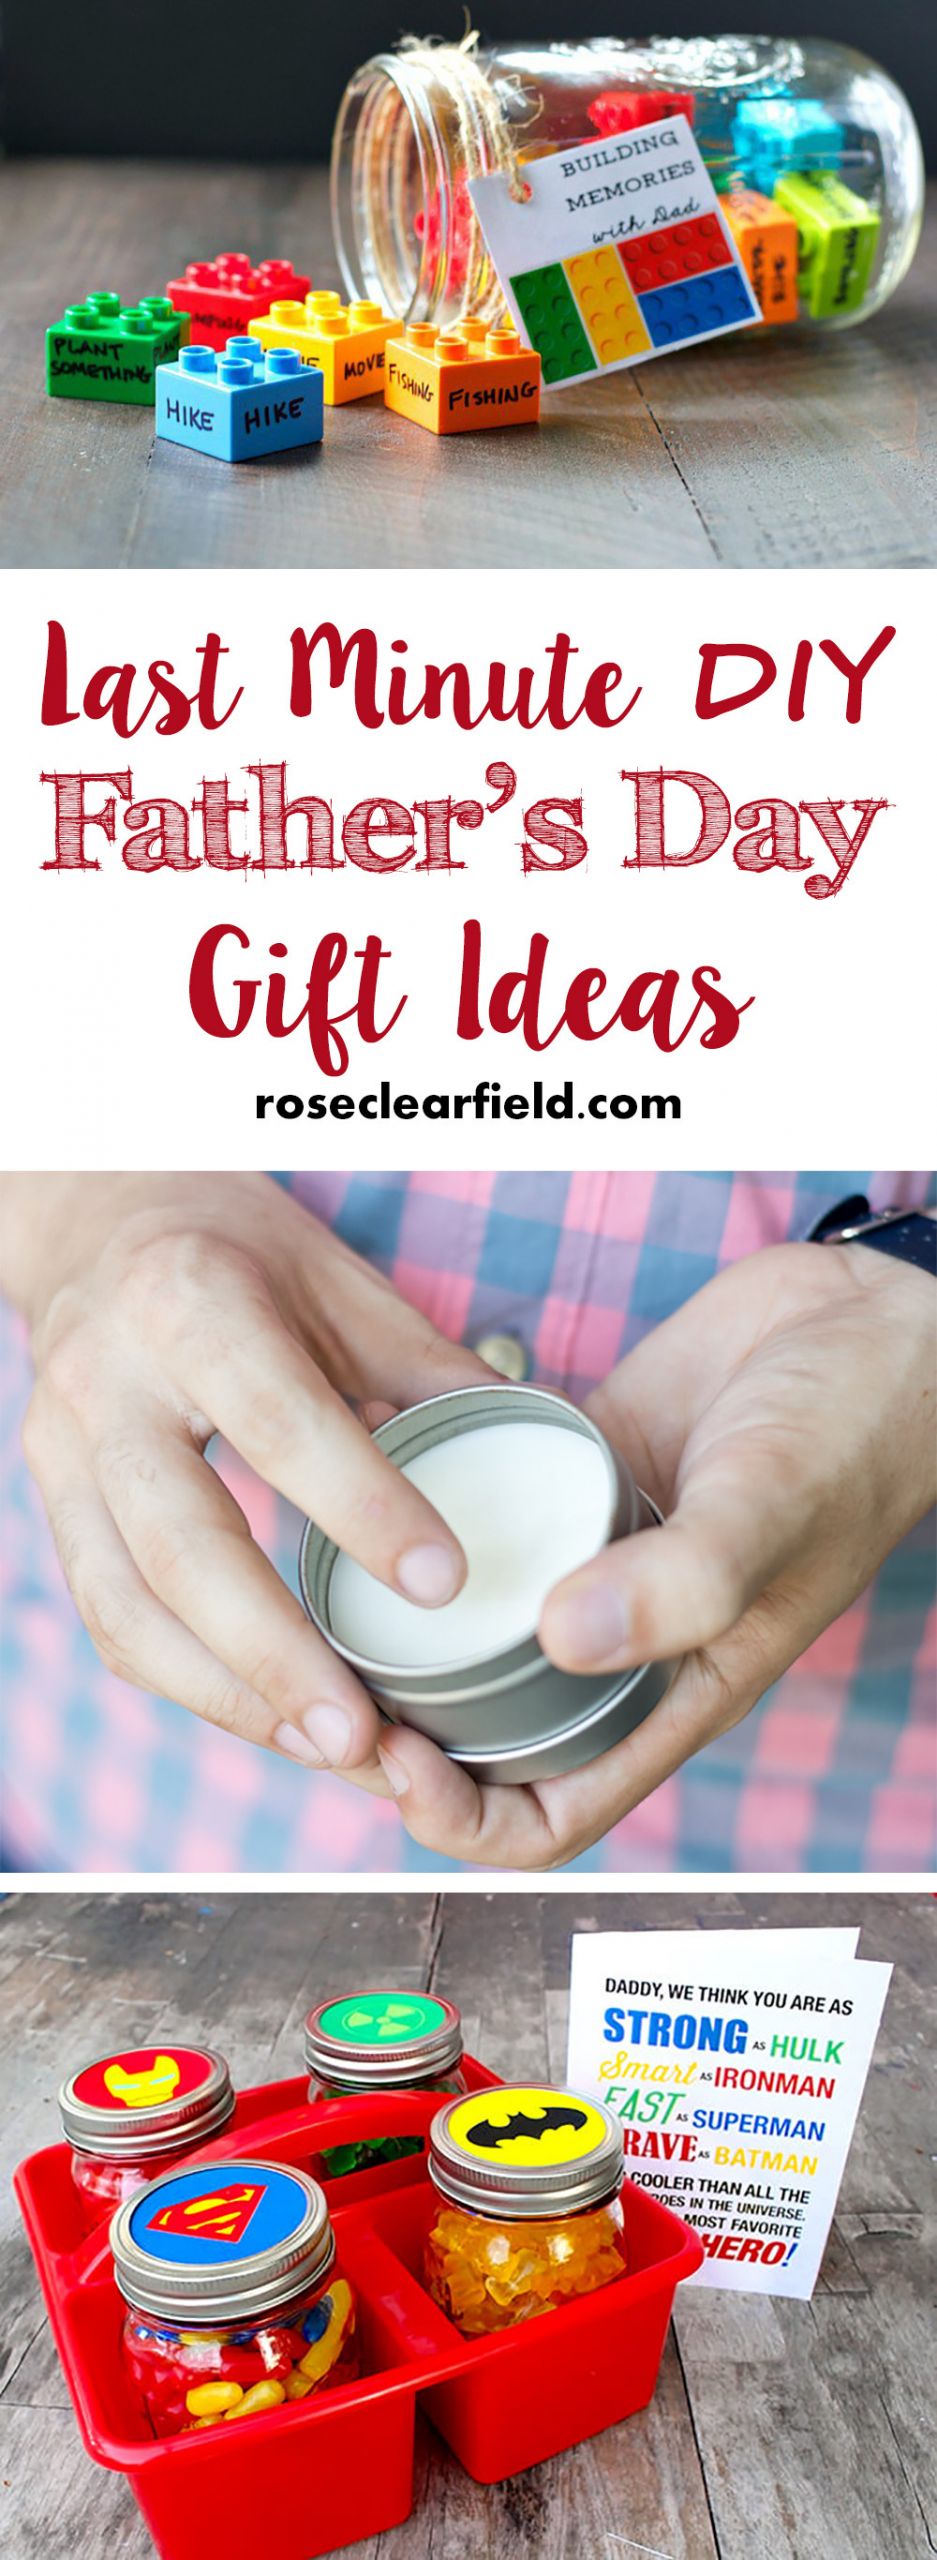 Fathers Day Gifts From Son
 Last Minute DIY Father s Day Gift Ideas • Rose Clearfield